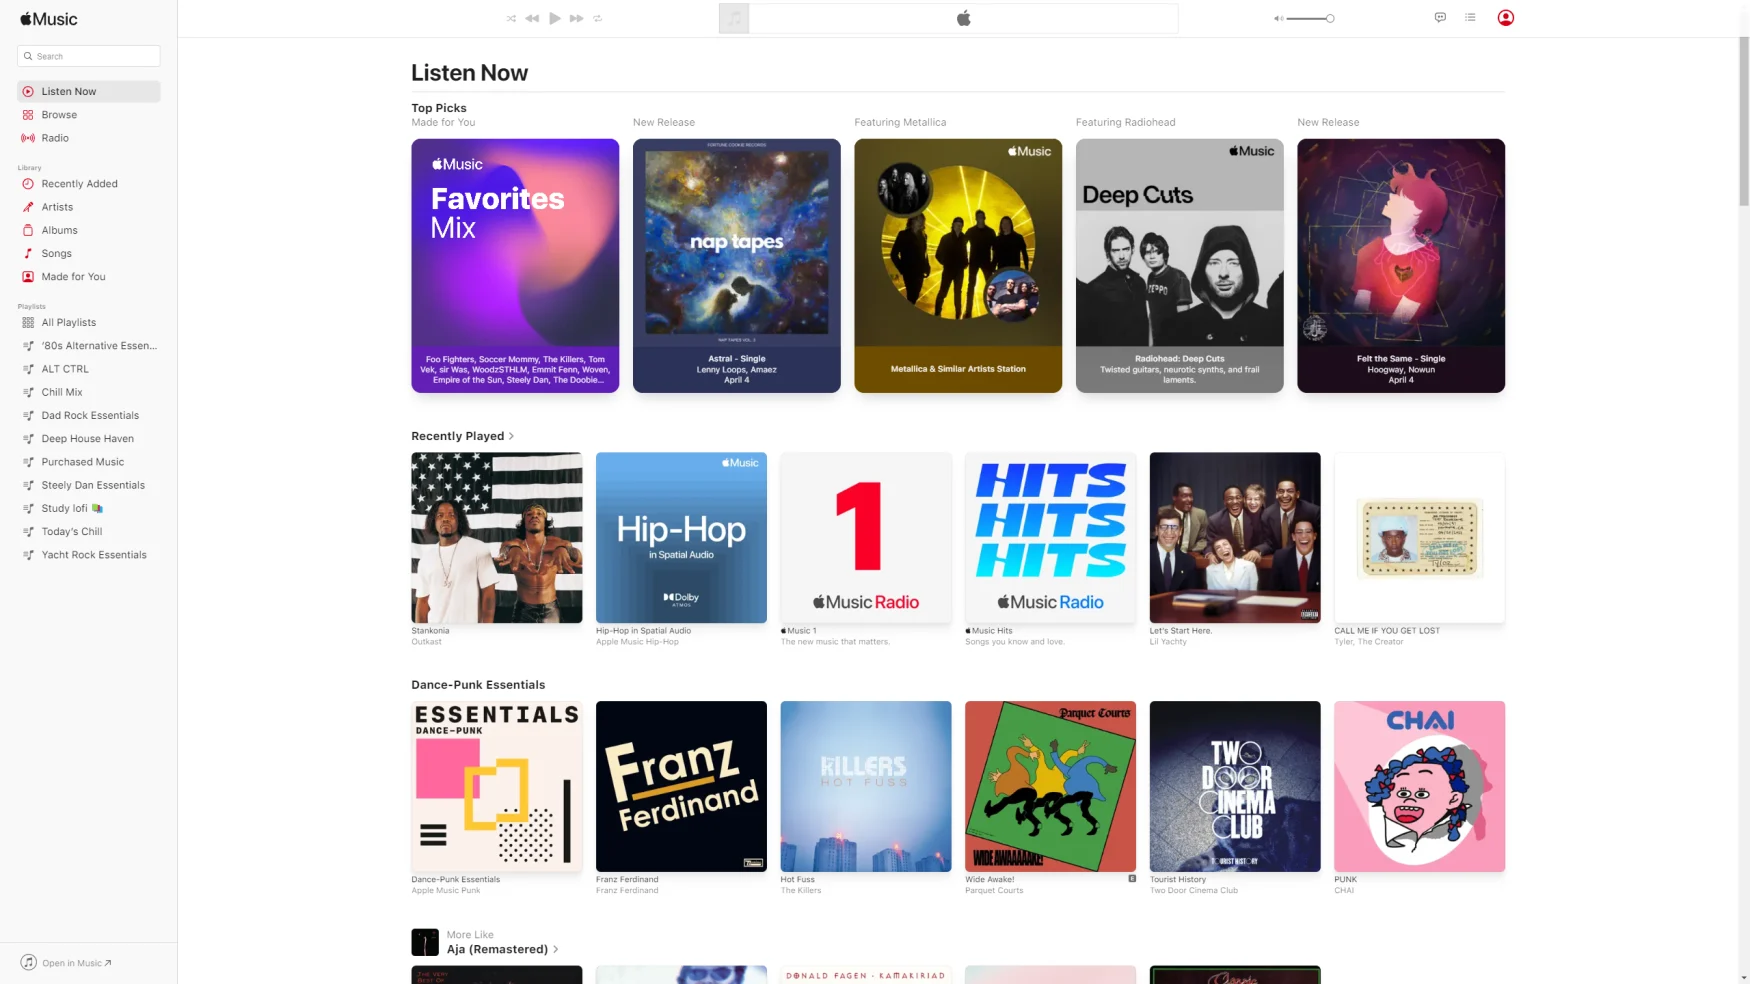 A screenshot of the Apple Music app on web browsers.